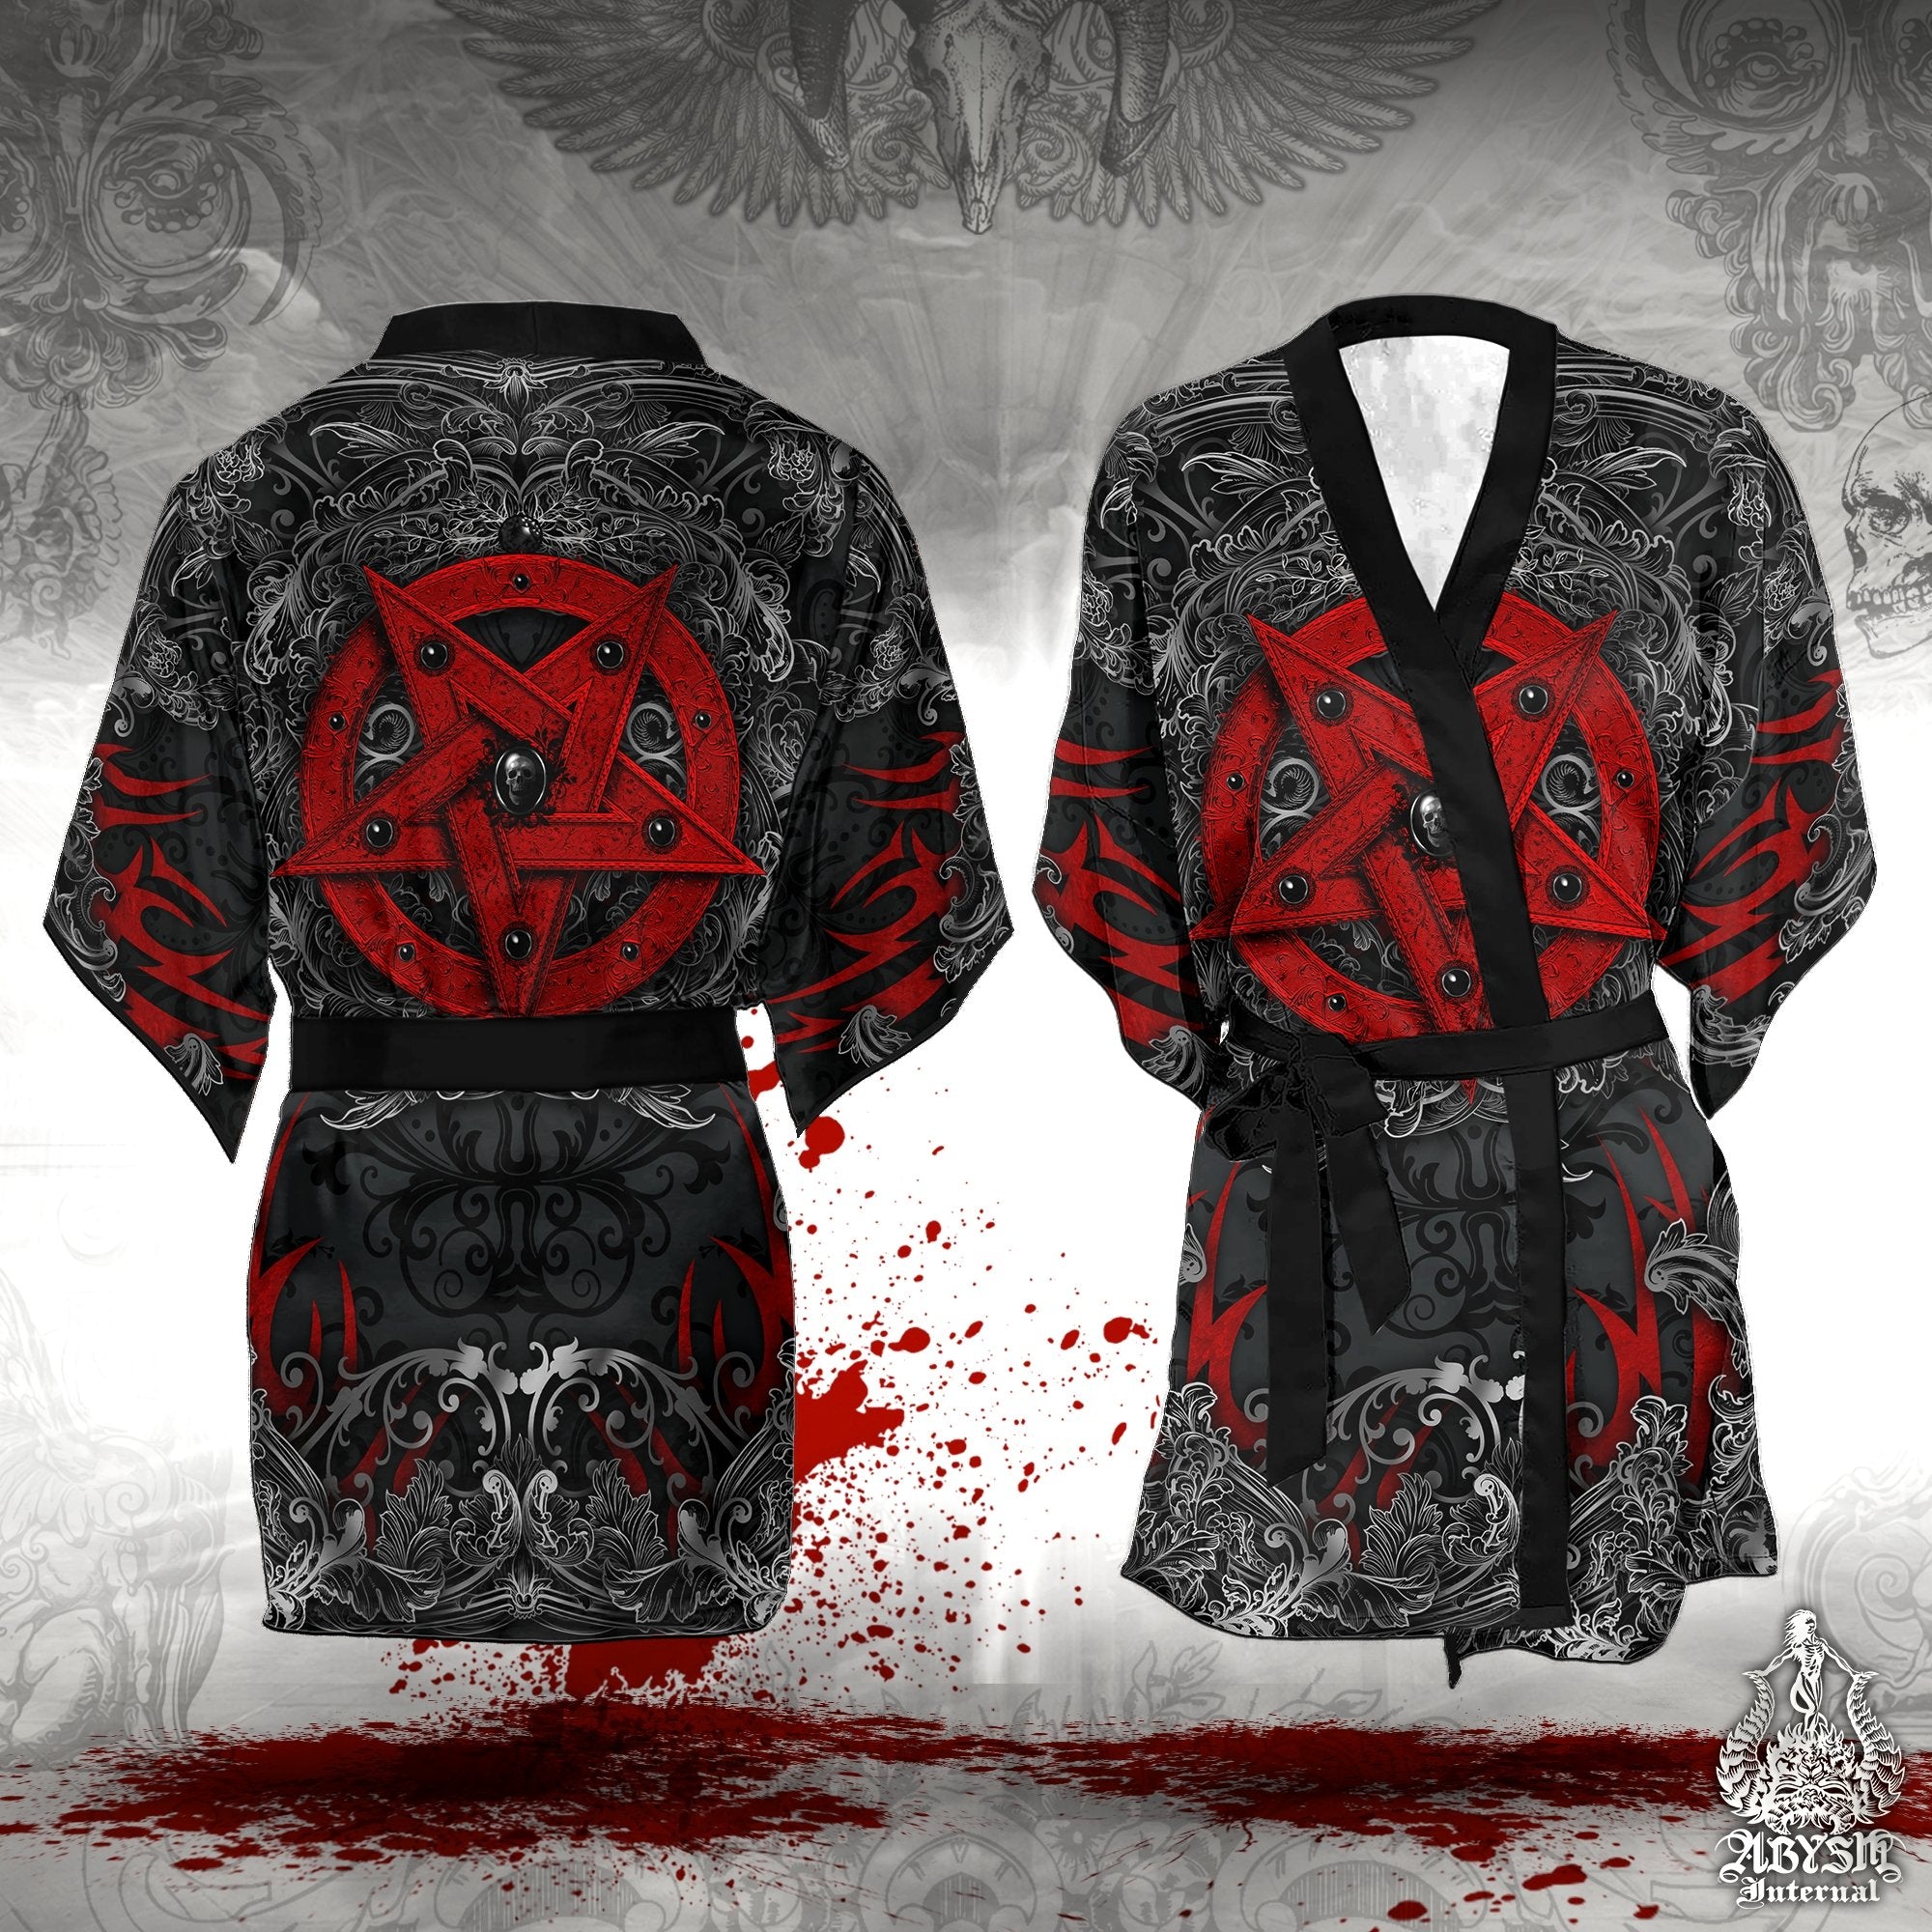 Pentagram Cover Up, Beach Outfit, Party Kimono, Metal Summer Festival Robe, Satanic Gothic Indie and Alternative Clothing, Unisex - Red Black - Abysm Internal